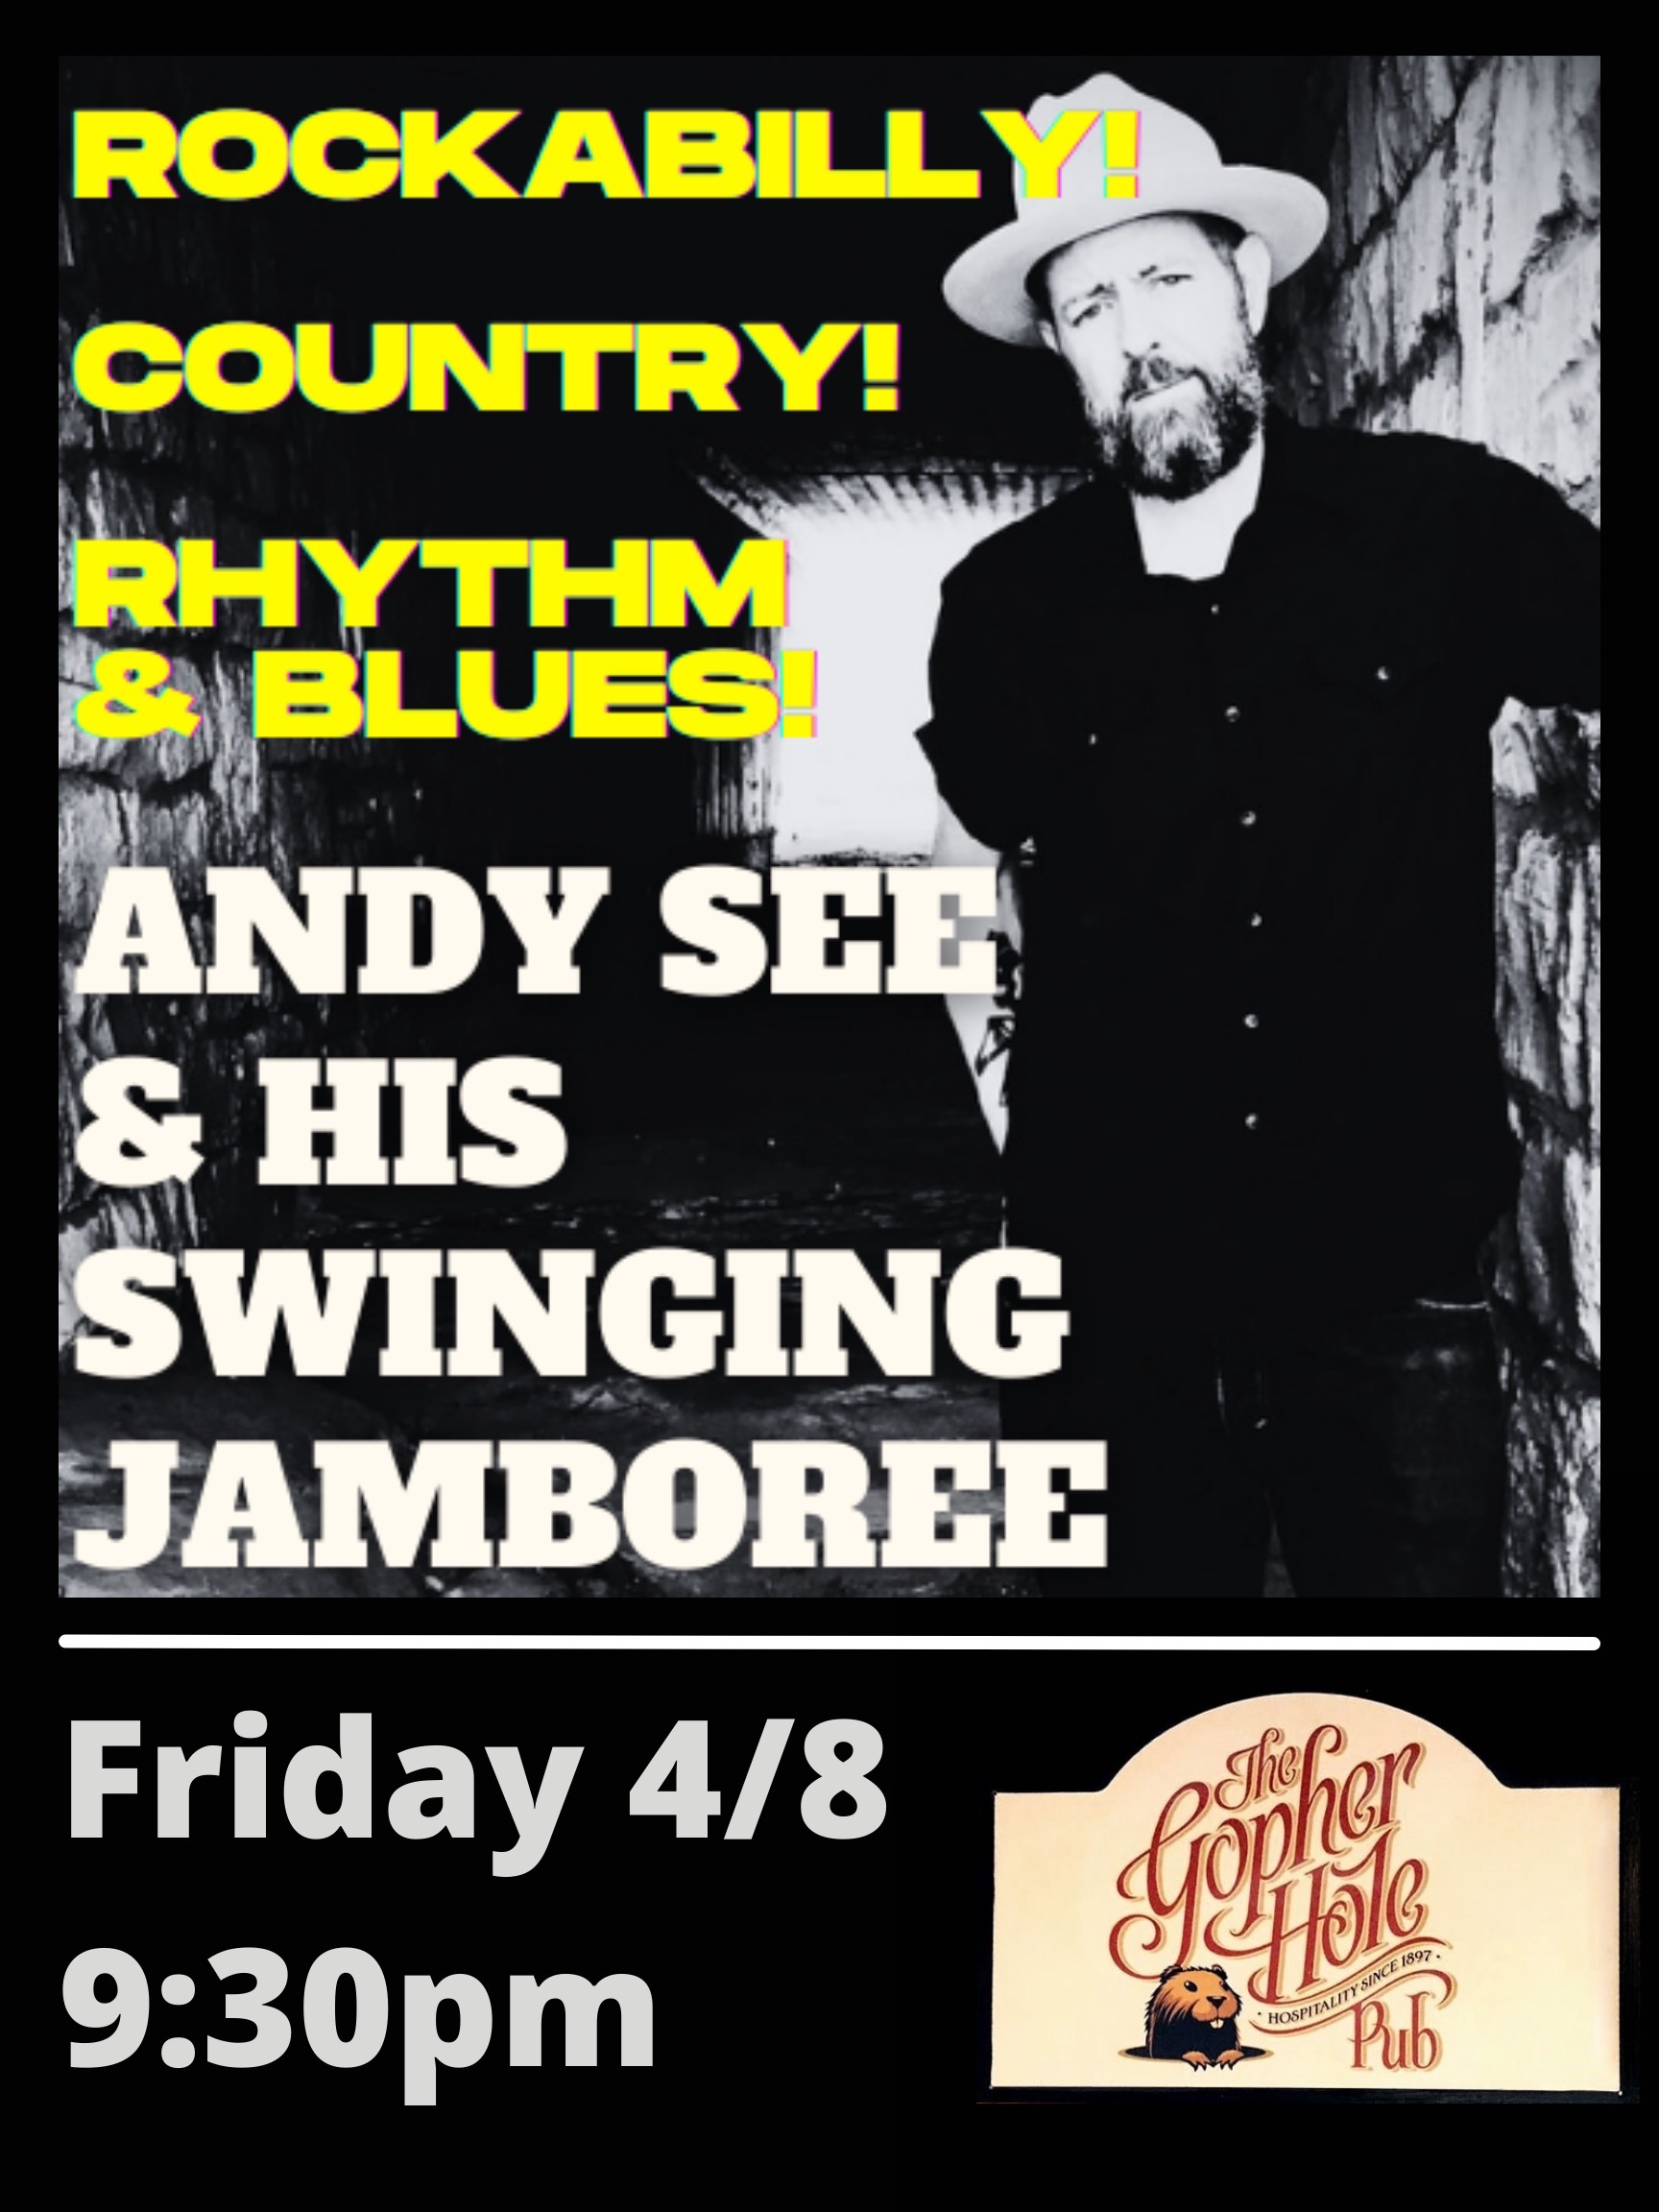 Andy See & Swinging Jamboree | Calendar Event | The Weatherford Hotel